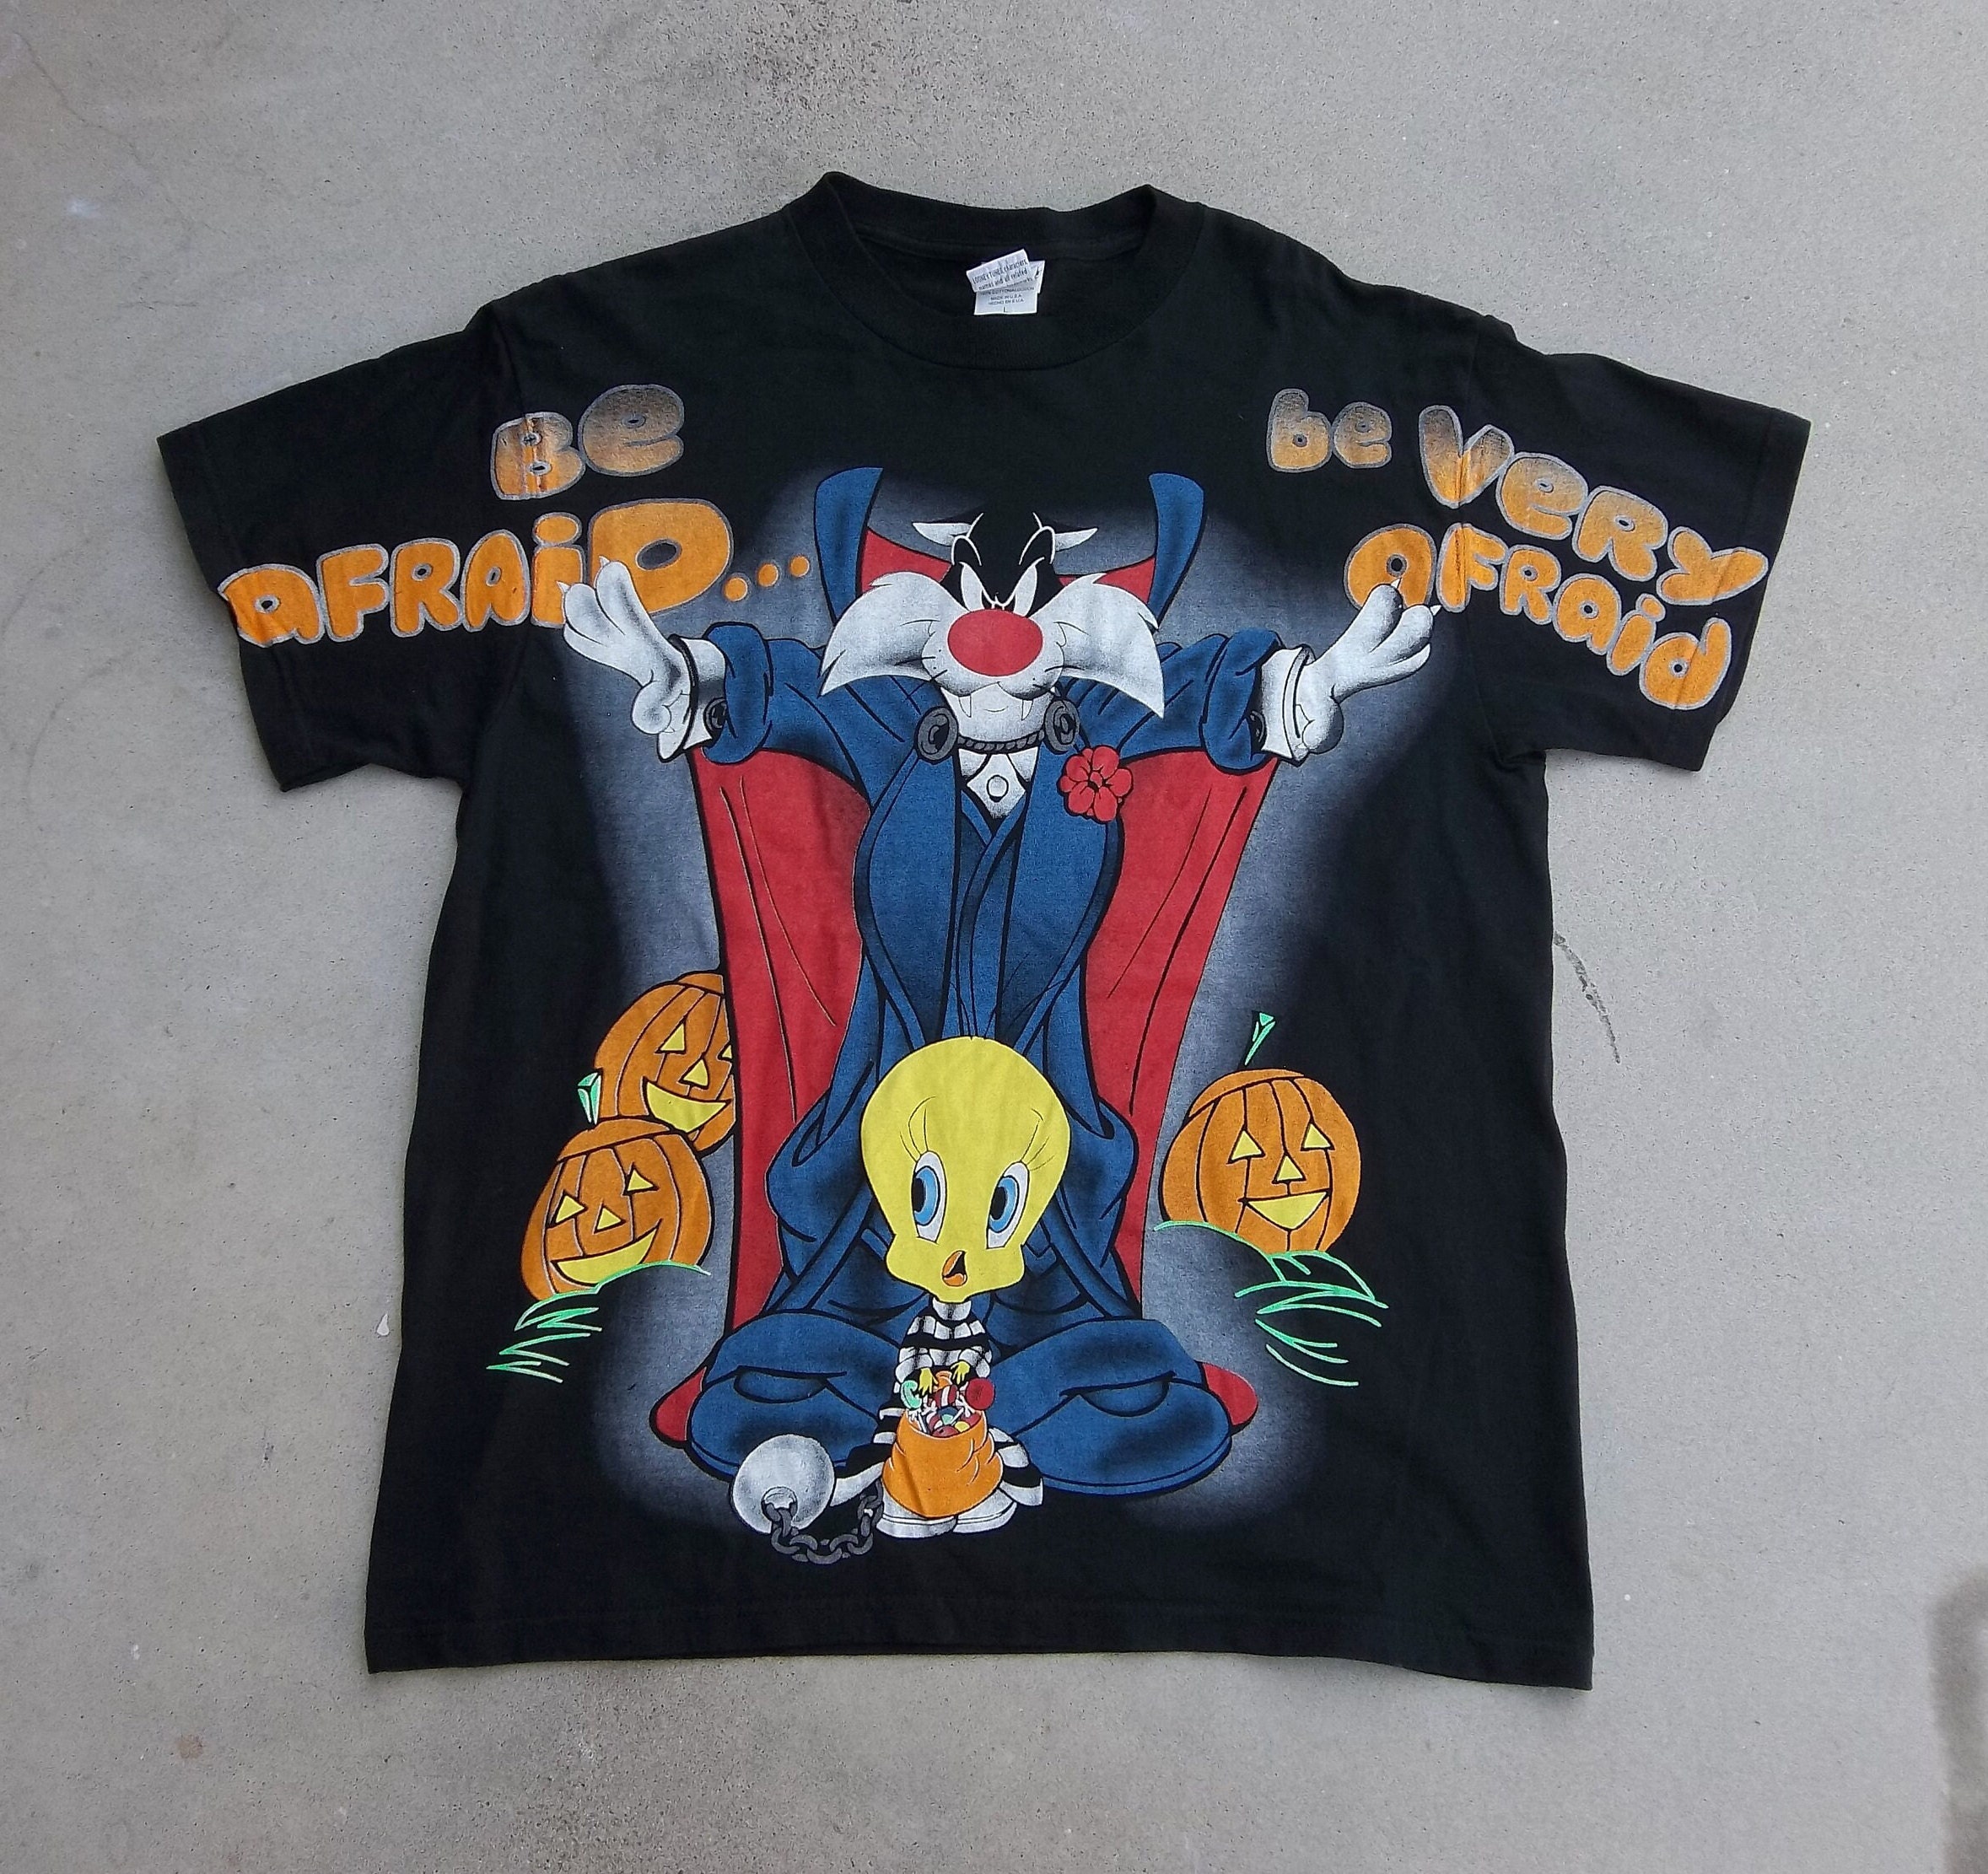 Vintage T-shirt Looney Tunes 1990s Sylvester the Cat Tweety picture image